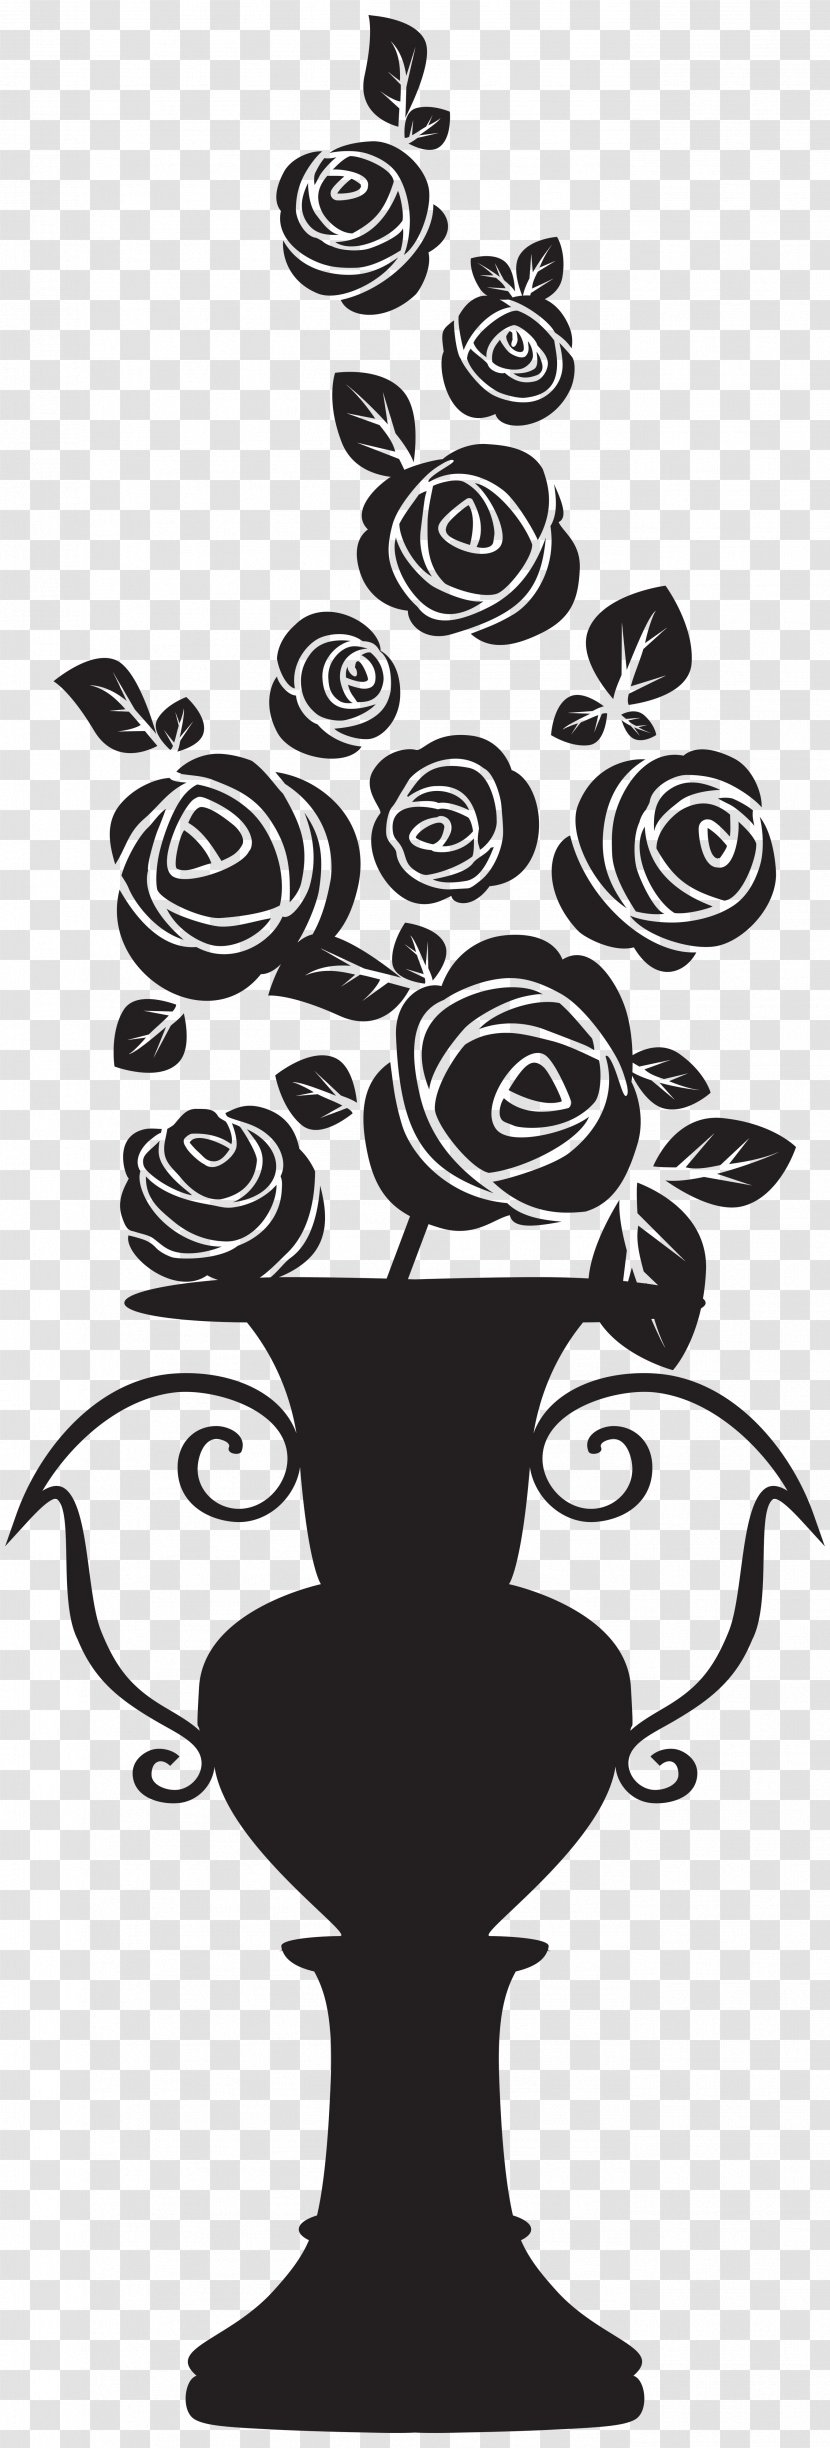 Silhouette Rose Vase Drawing Clip Art - Painting - Cliparts Transparent PNG